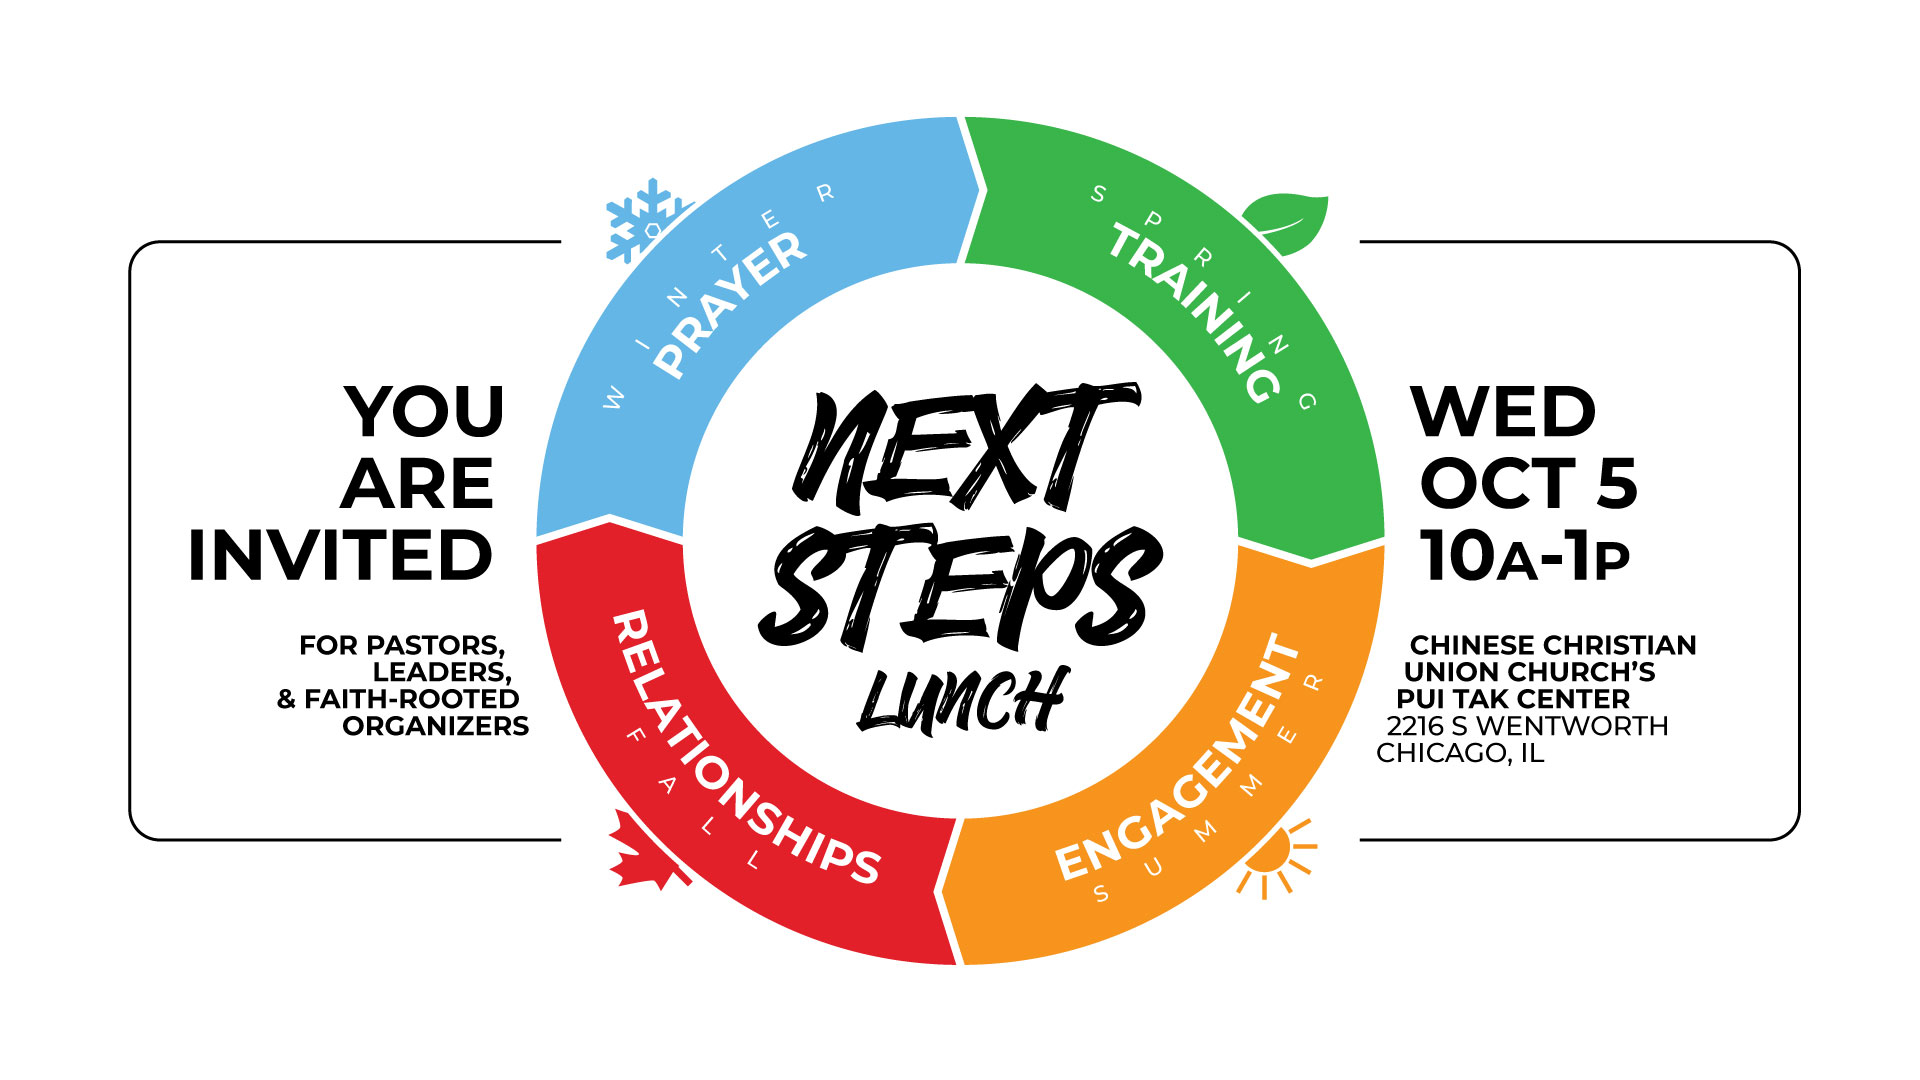 Next Steps Lunch 2022